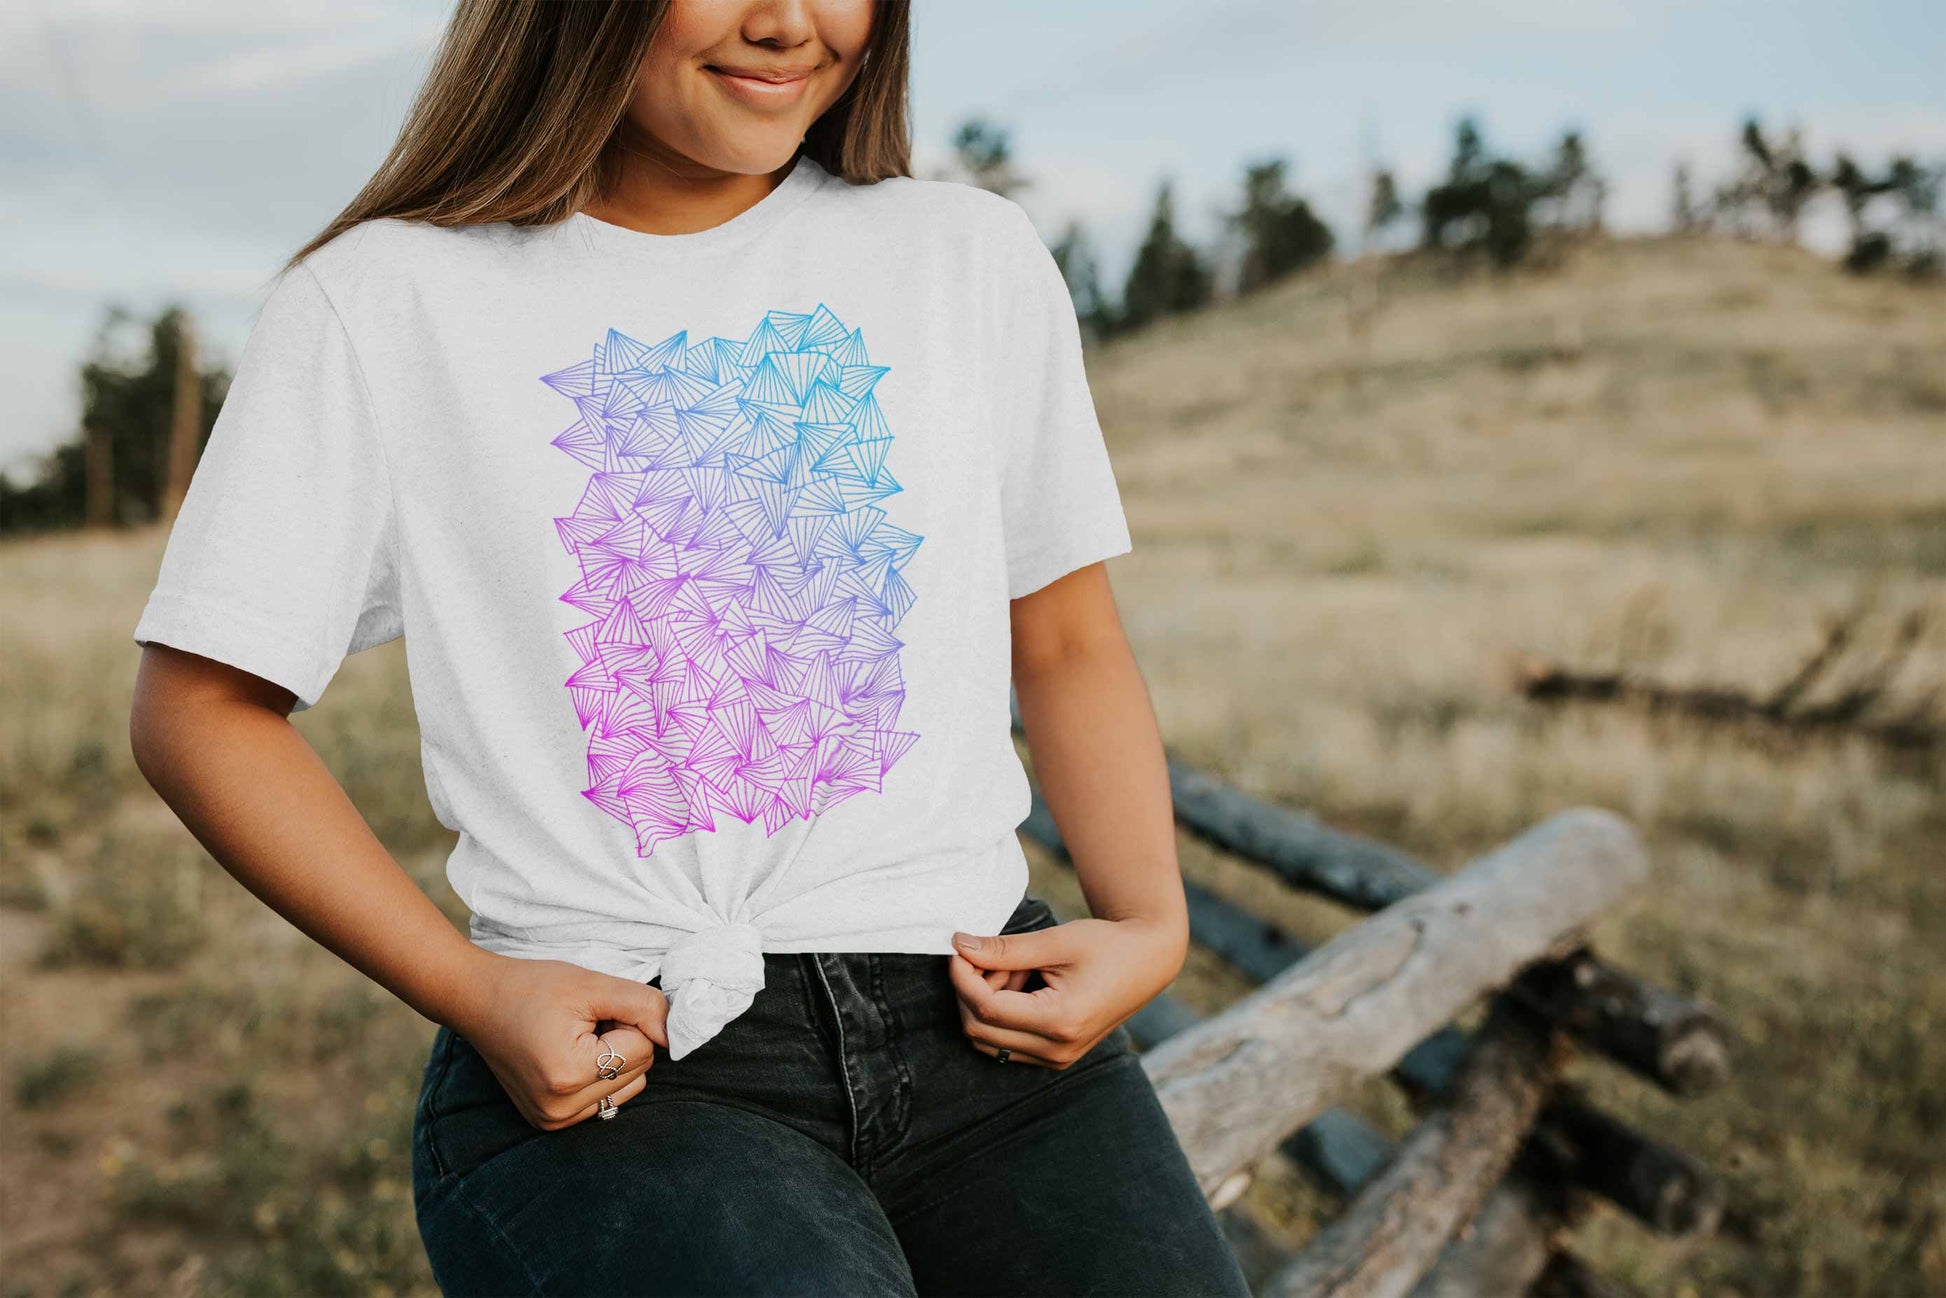 Model posing in a field with gaggle of triangles gradient design on white unisex t-shirt.